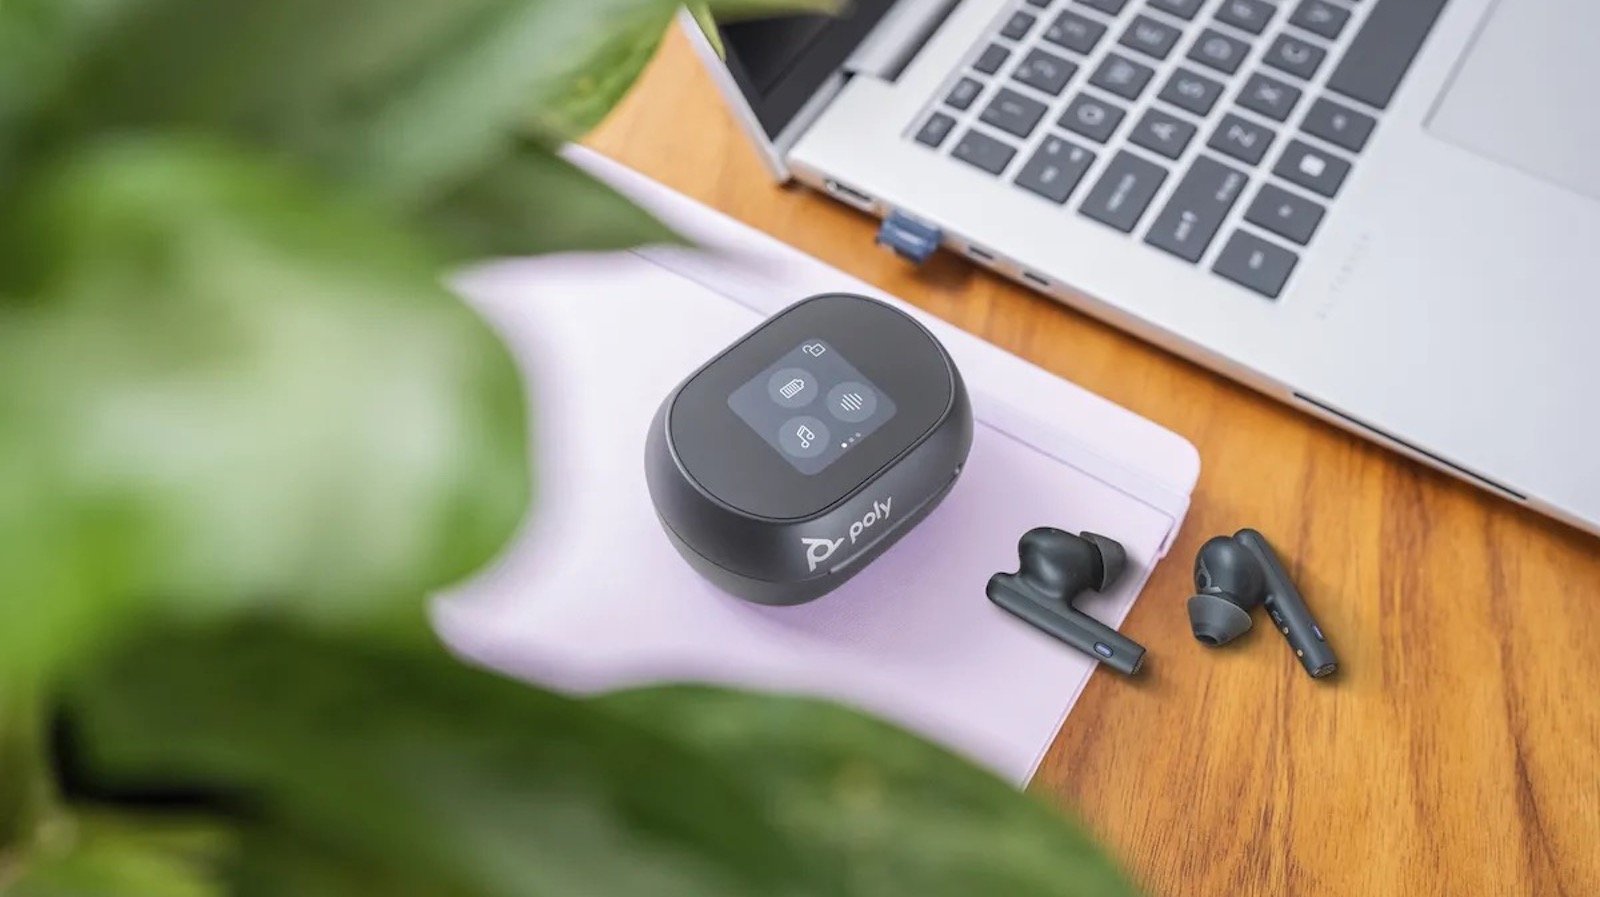 Poly Voyager Free 60 true wireless earbuds comes with a touchscreen Smart Charge Case